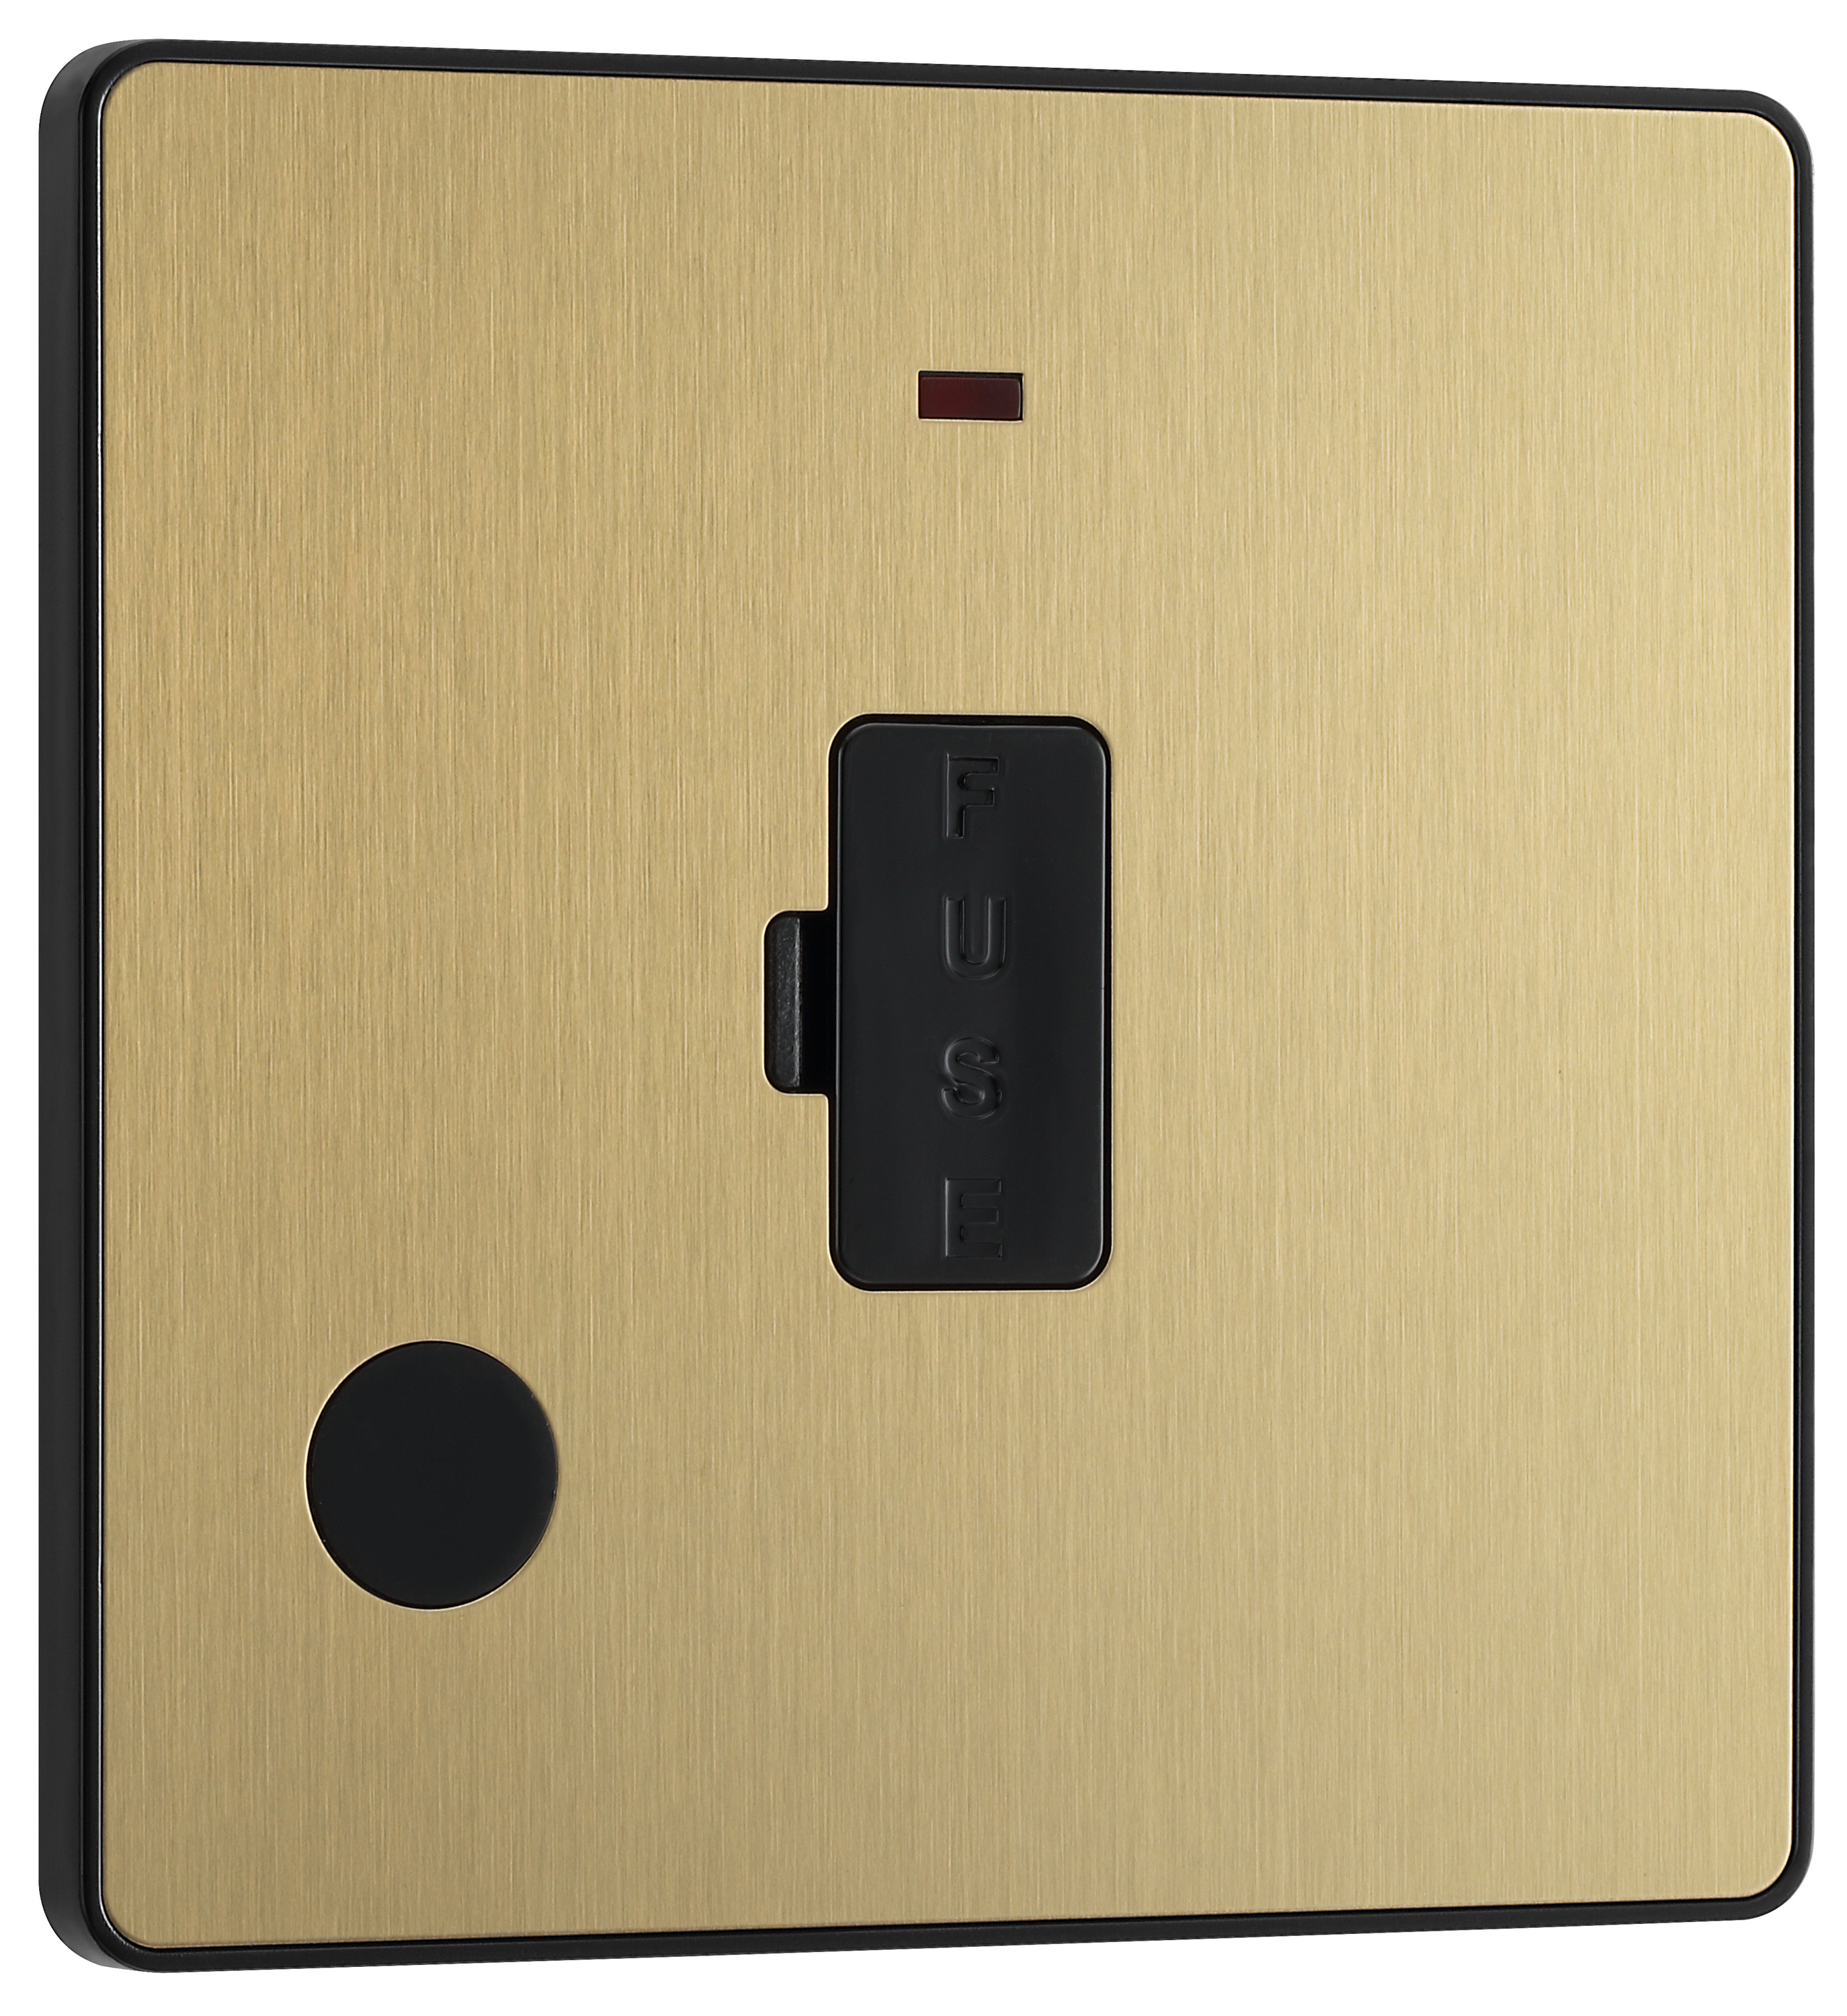 Image of BG Evolve Brushed Brass 13A Unswitched Fused Connection Unit with Power Led Indicator & Flex Outlet